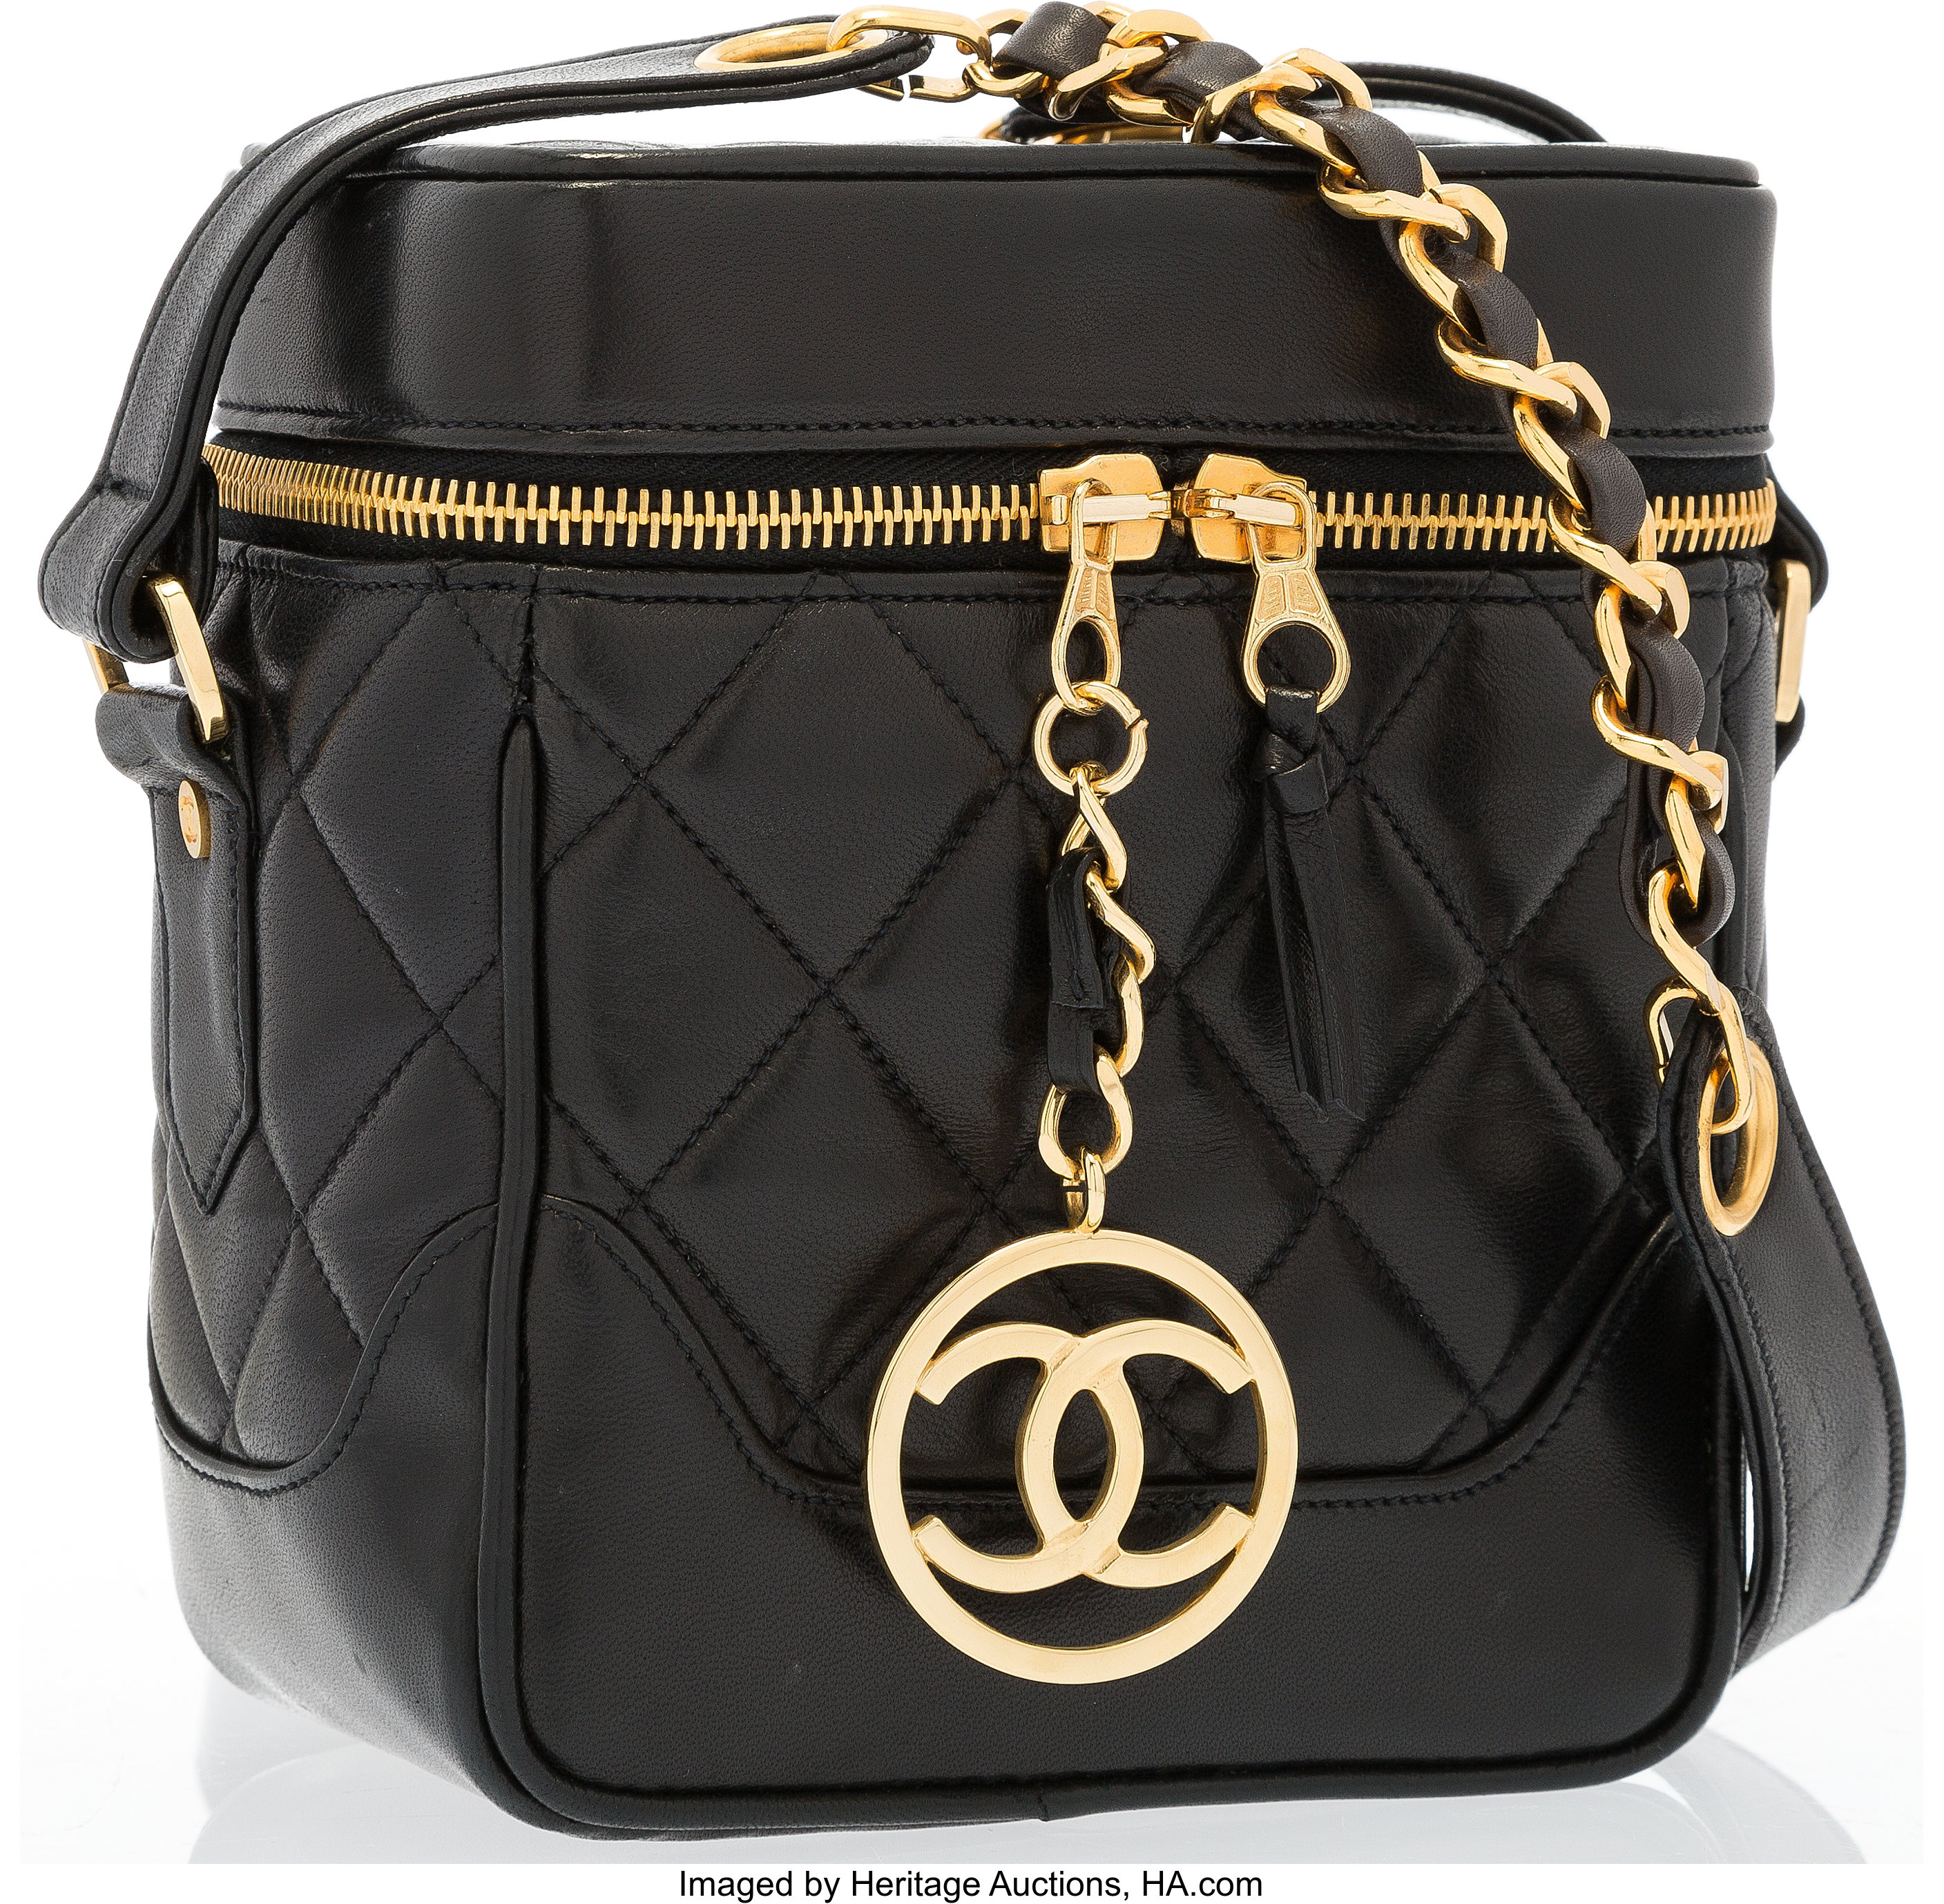 Chanel Black Quilted Lambskin Leather Camera Bag with Gold